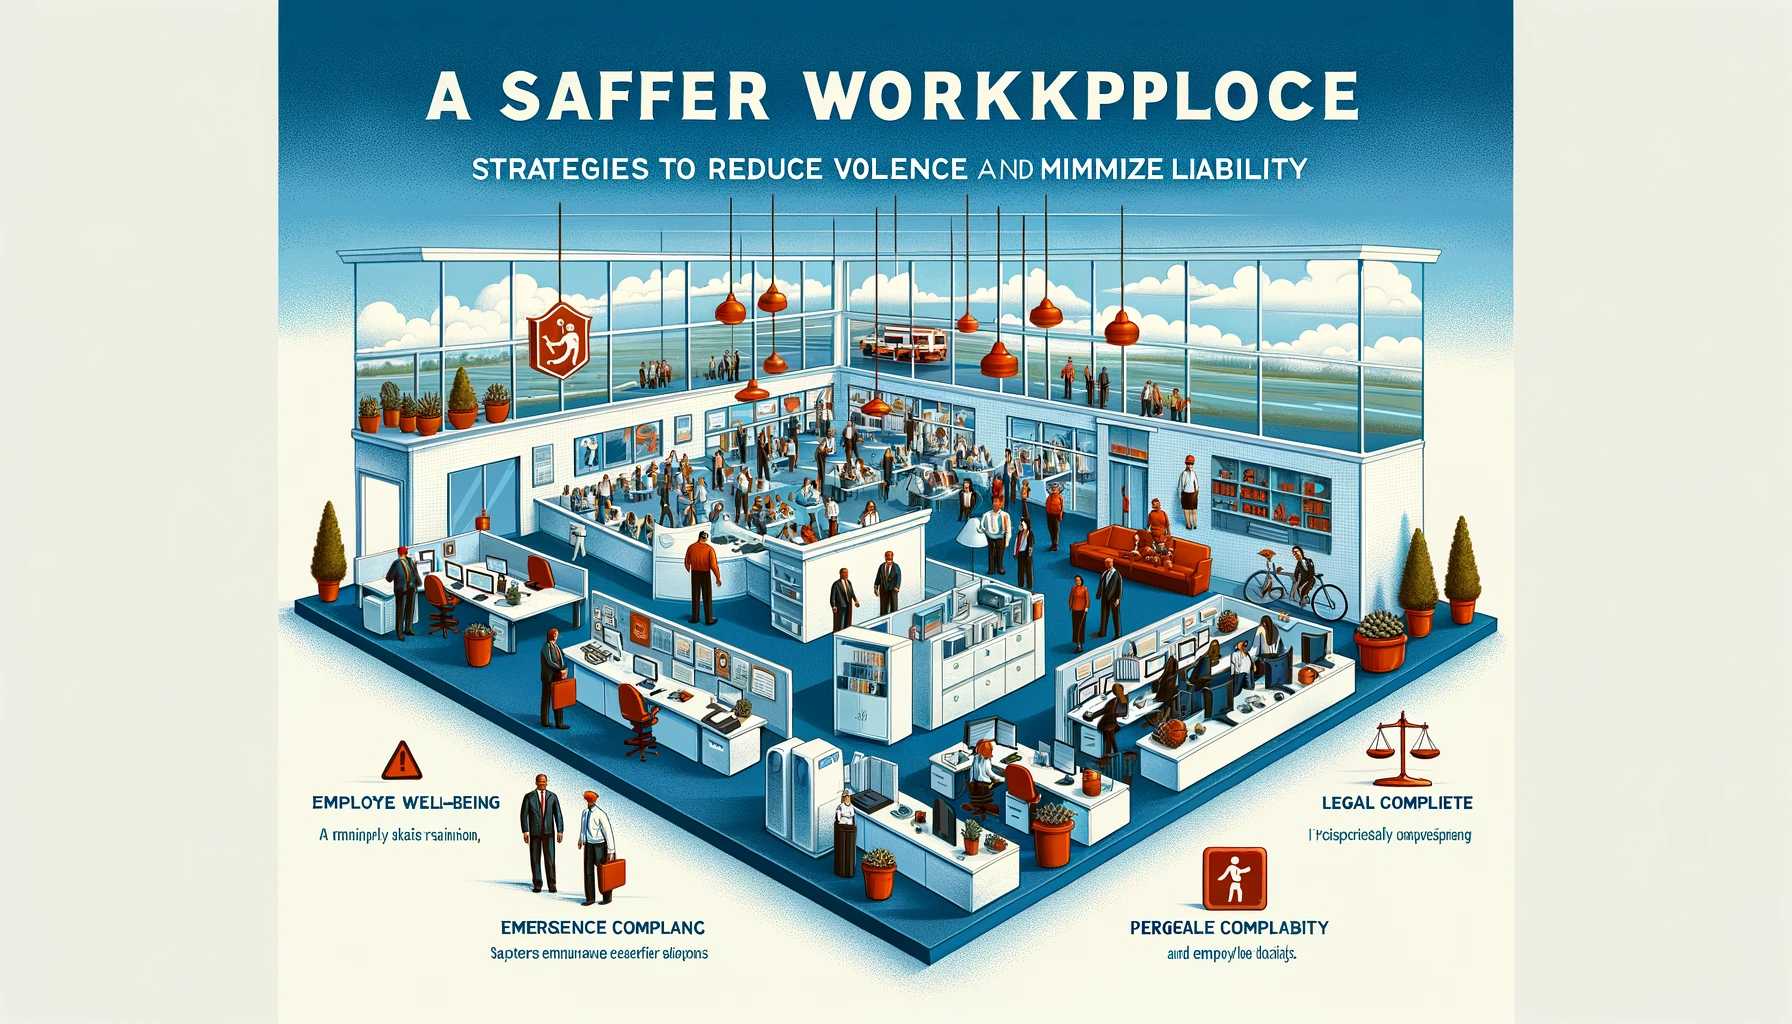 A Safer Workplace: Strategies to Reduce Violence and Minimize Liability